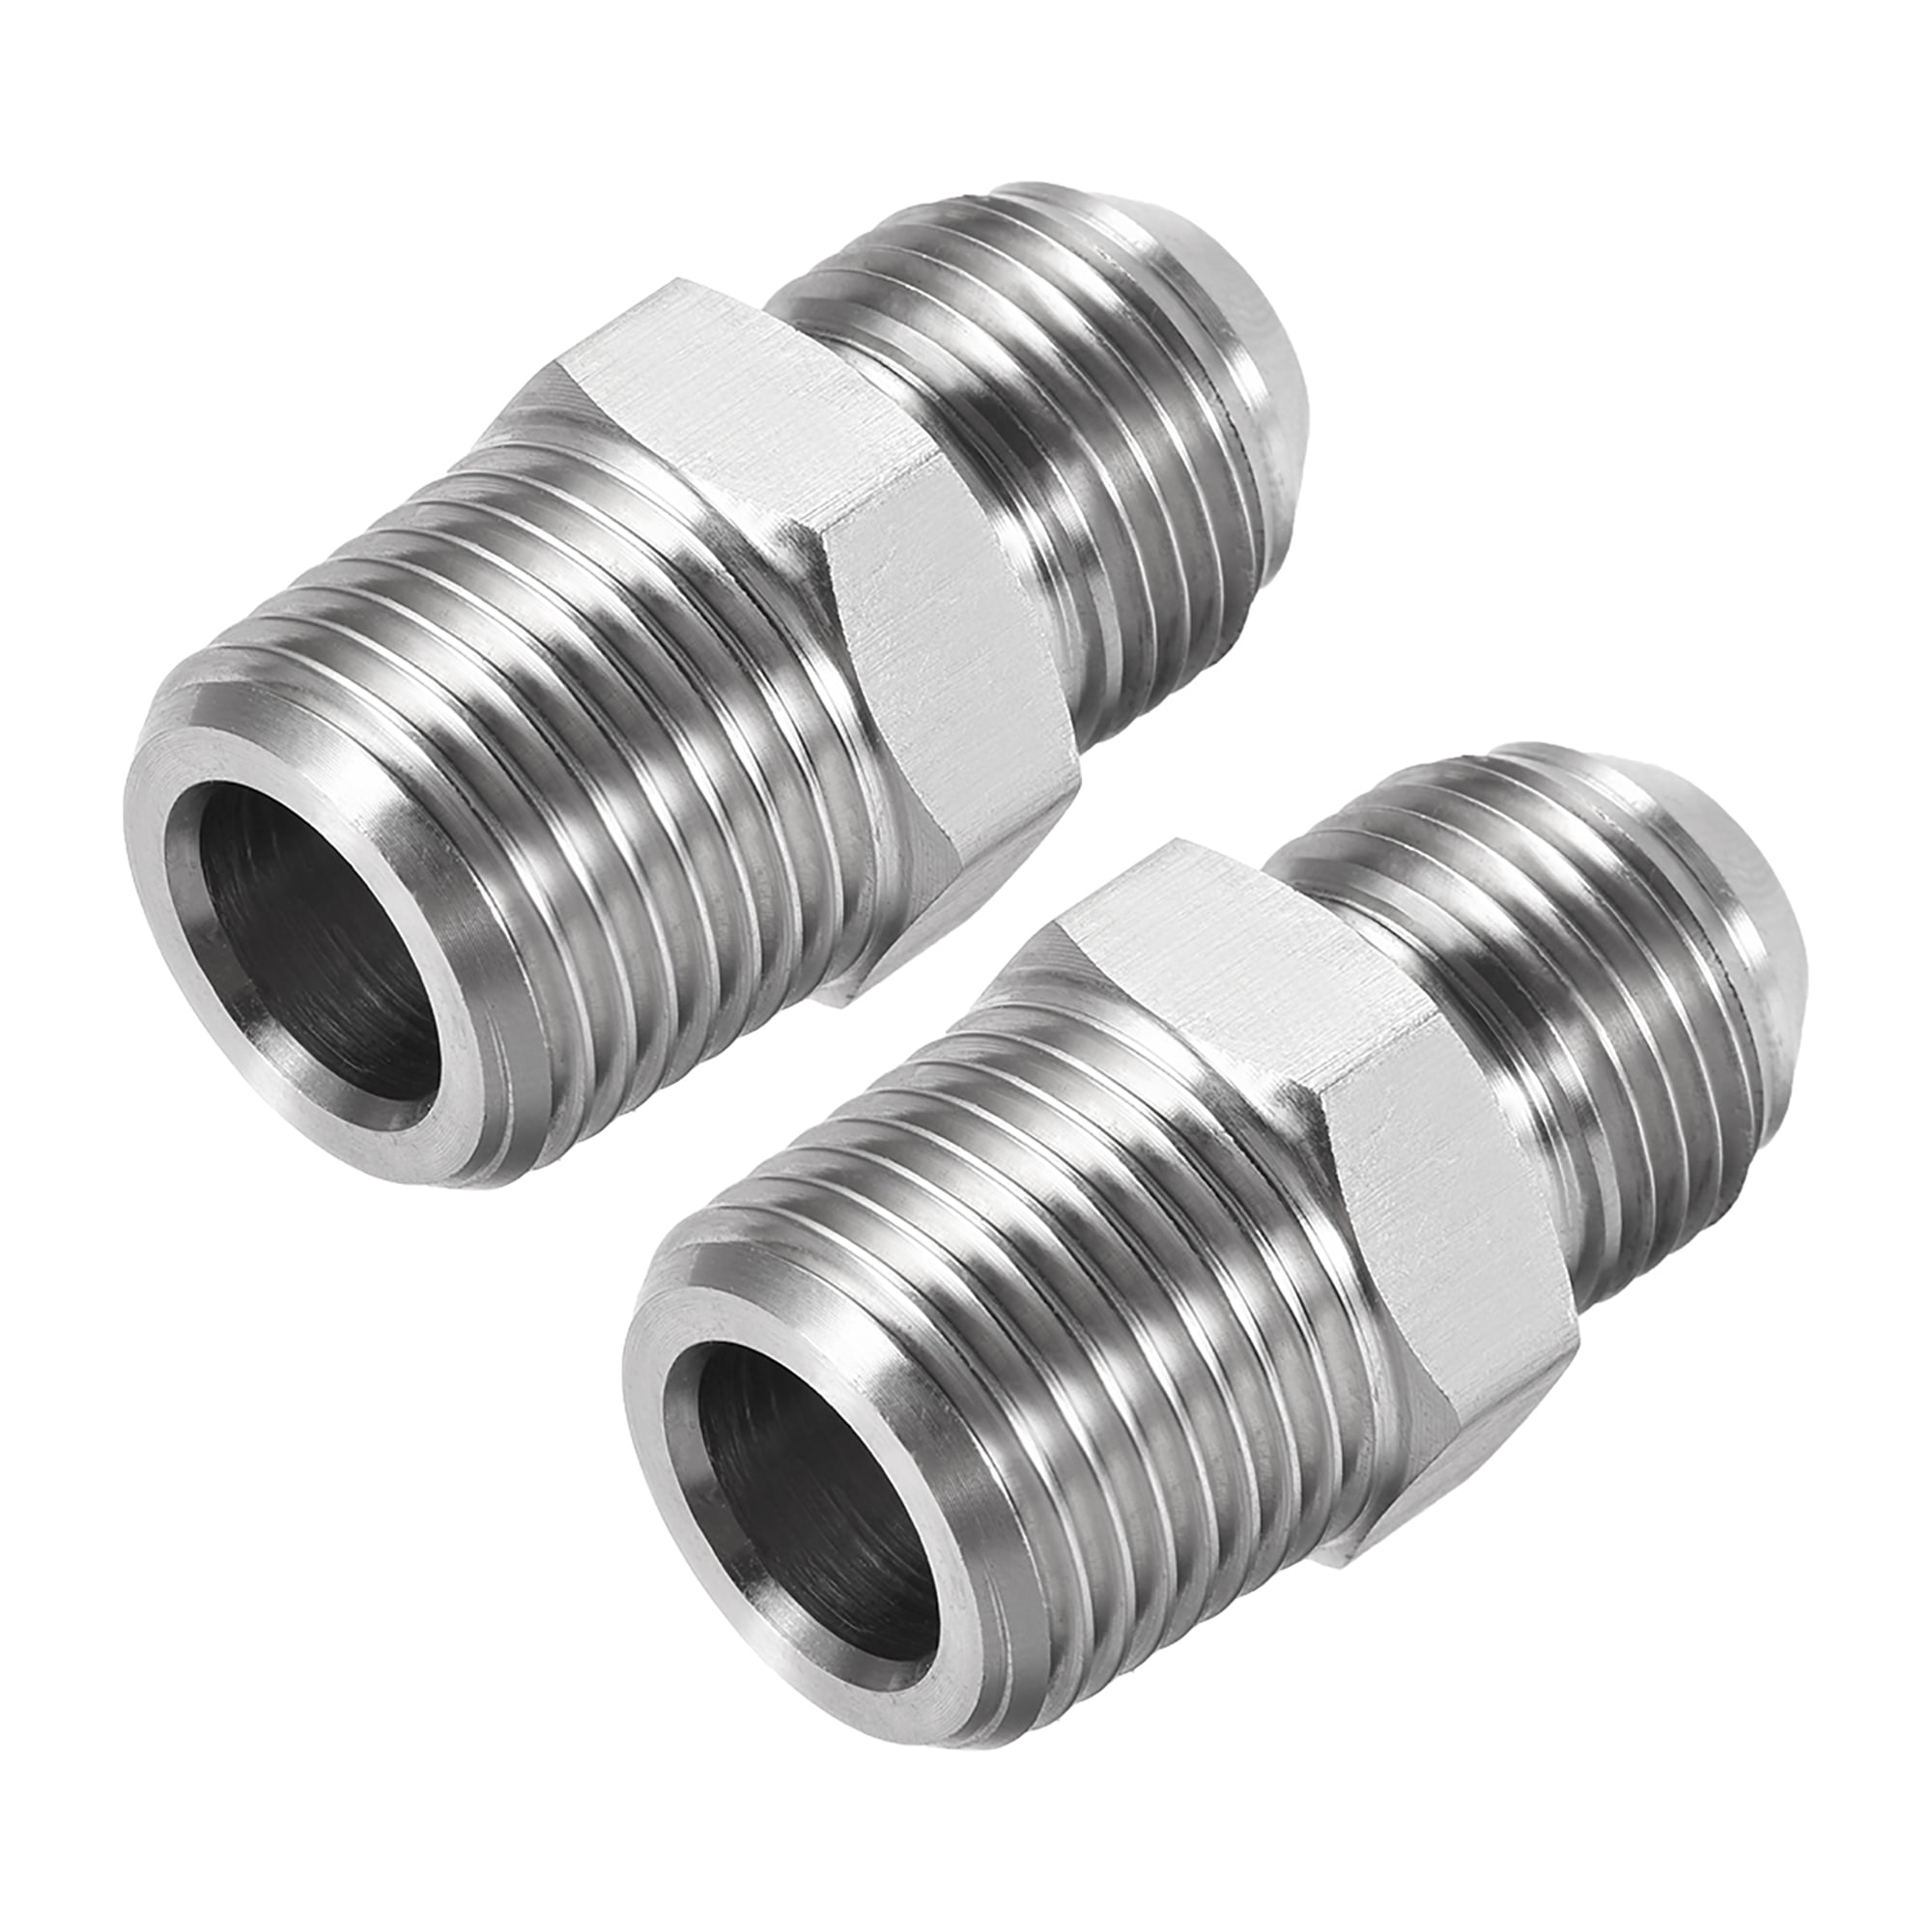 Hex Nipple 1/8"x1/4" Male Stainless Steel SS 304 Fit Threaded Reducer Pipe NPT 